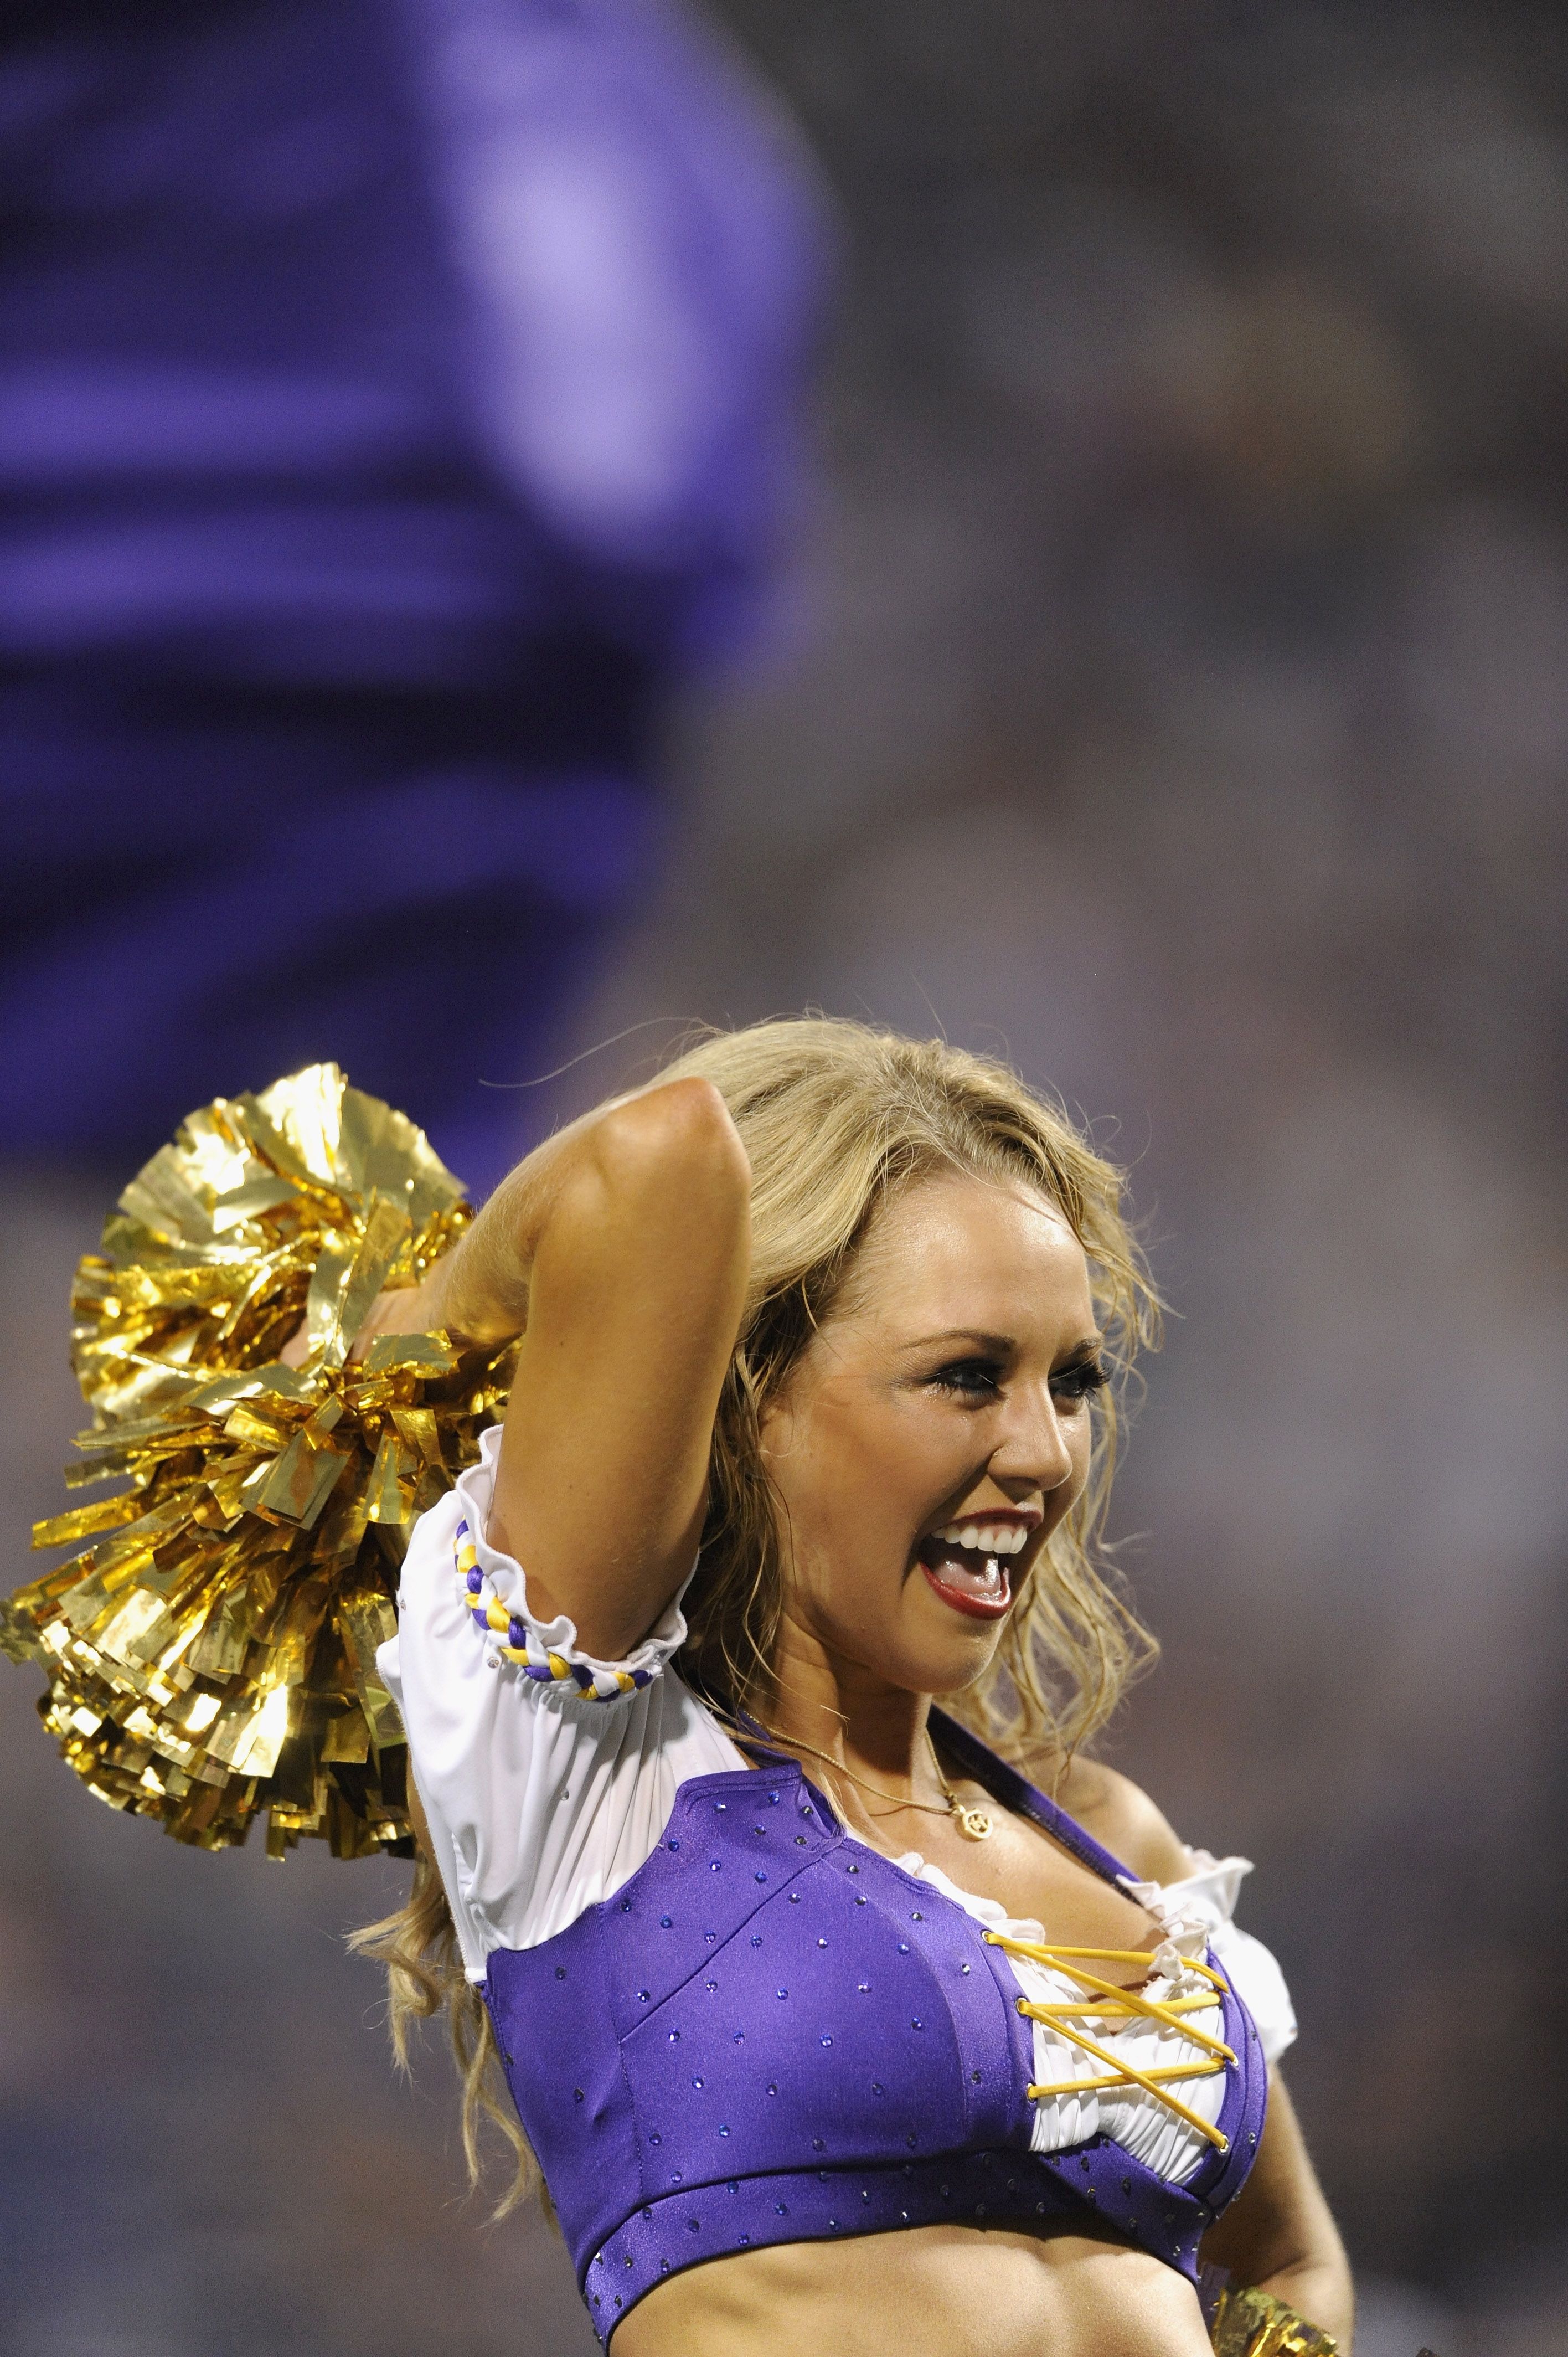 The 10 hottest cheerleaders in the NFL - Muscle & Fitness